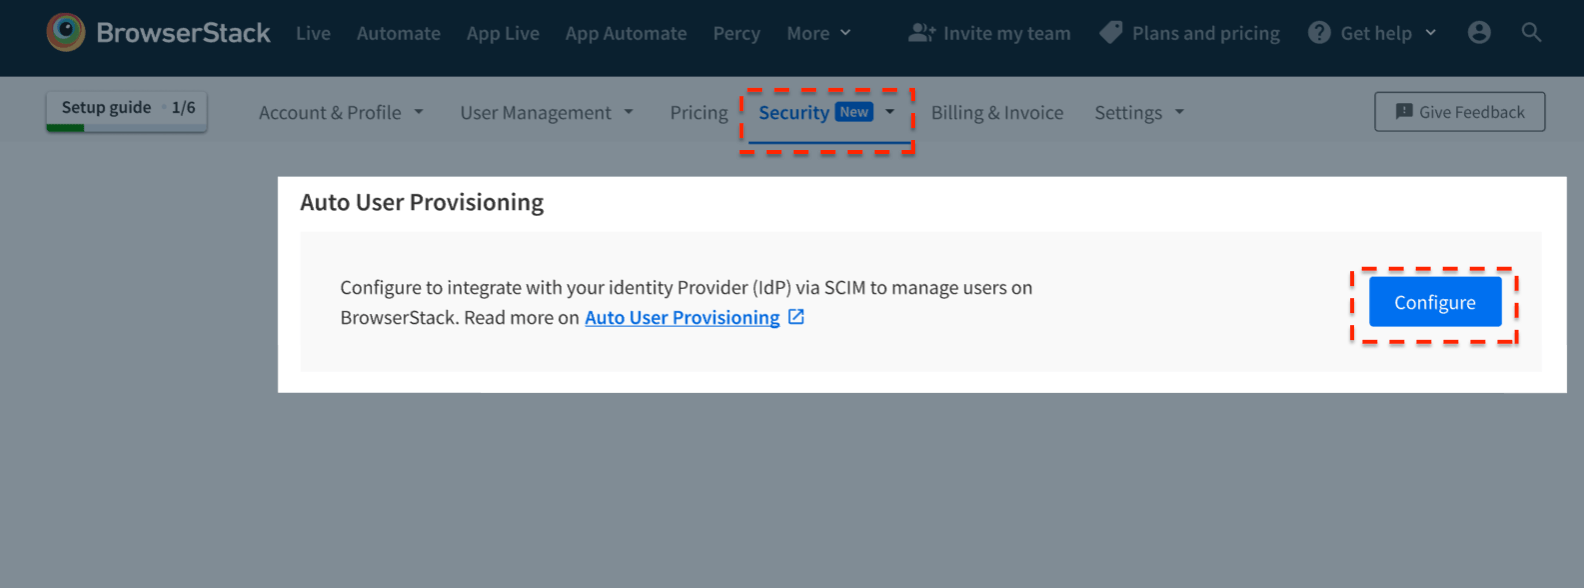 Under auto user provisioning, select configure